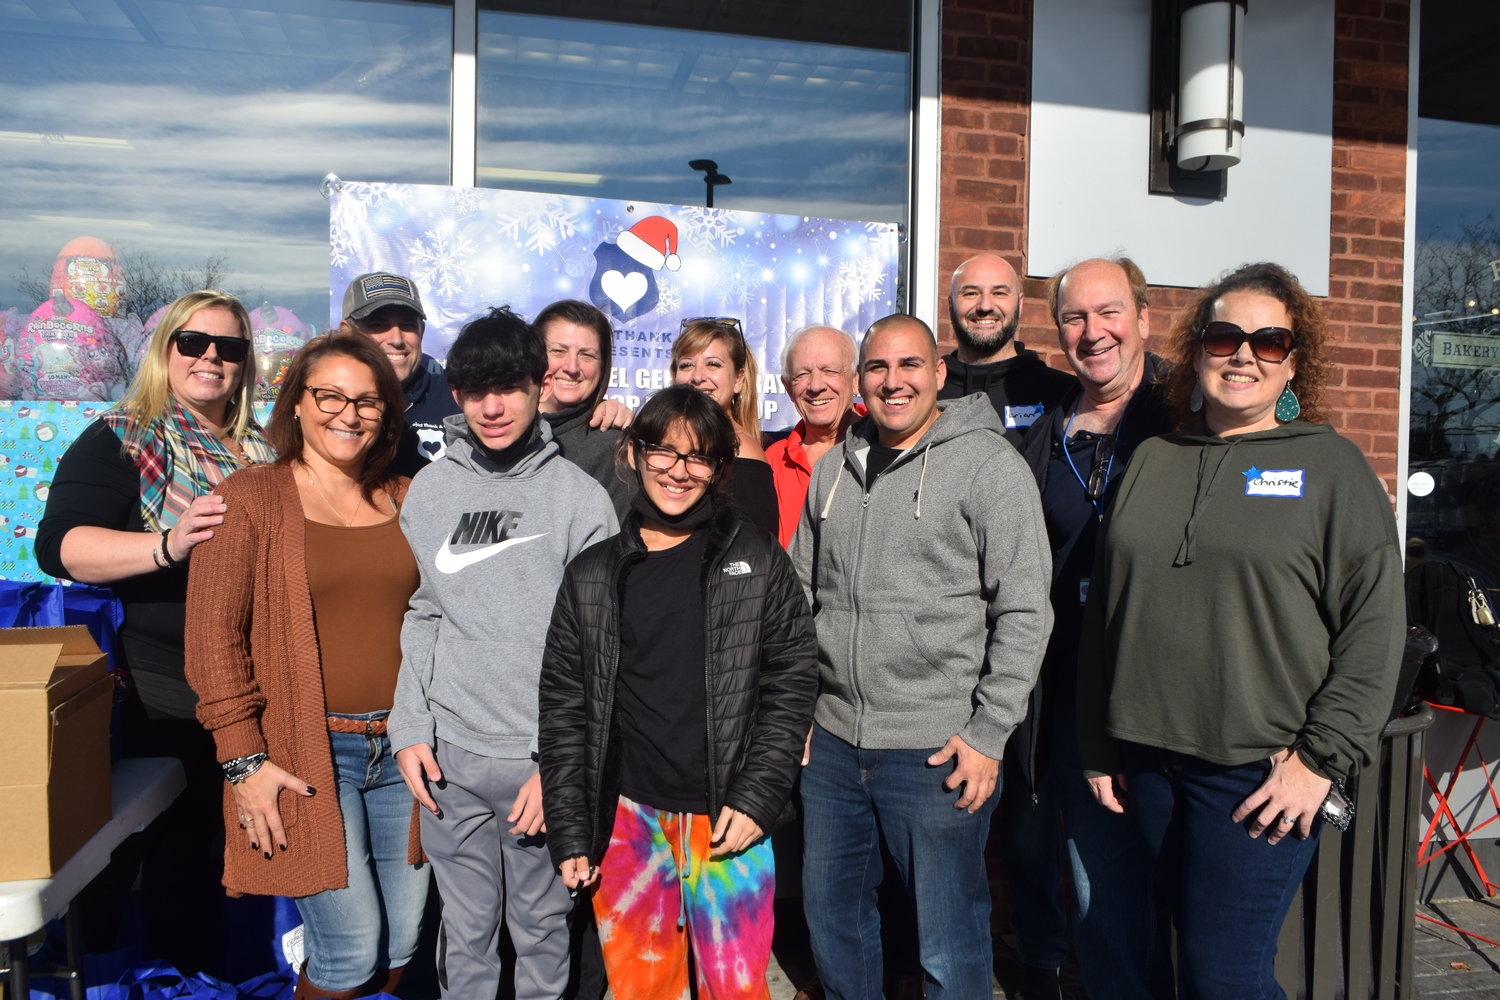 Project Thank A Cop held its second annual Michael Geraldi-Ray Abear Holiday Shop with a Cop at Matty’s Toy Stop in Hewlett on Dec. 4. From left in back were Maegan and Andy Fox, Candace Kearny, Barbara Kartalis, Jim McQuade, Brian Goldstein and David Friedman. From left in front were Carmen, Luca and Mia Geraldi, Patrick Collins and Christie Goldstein.